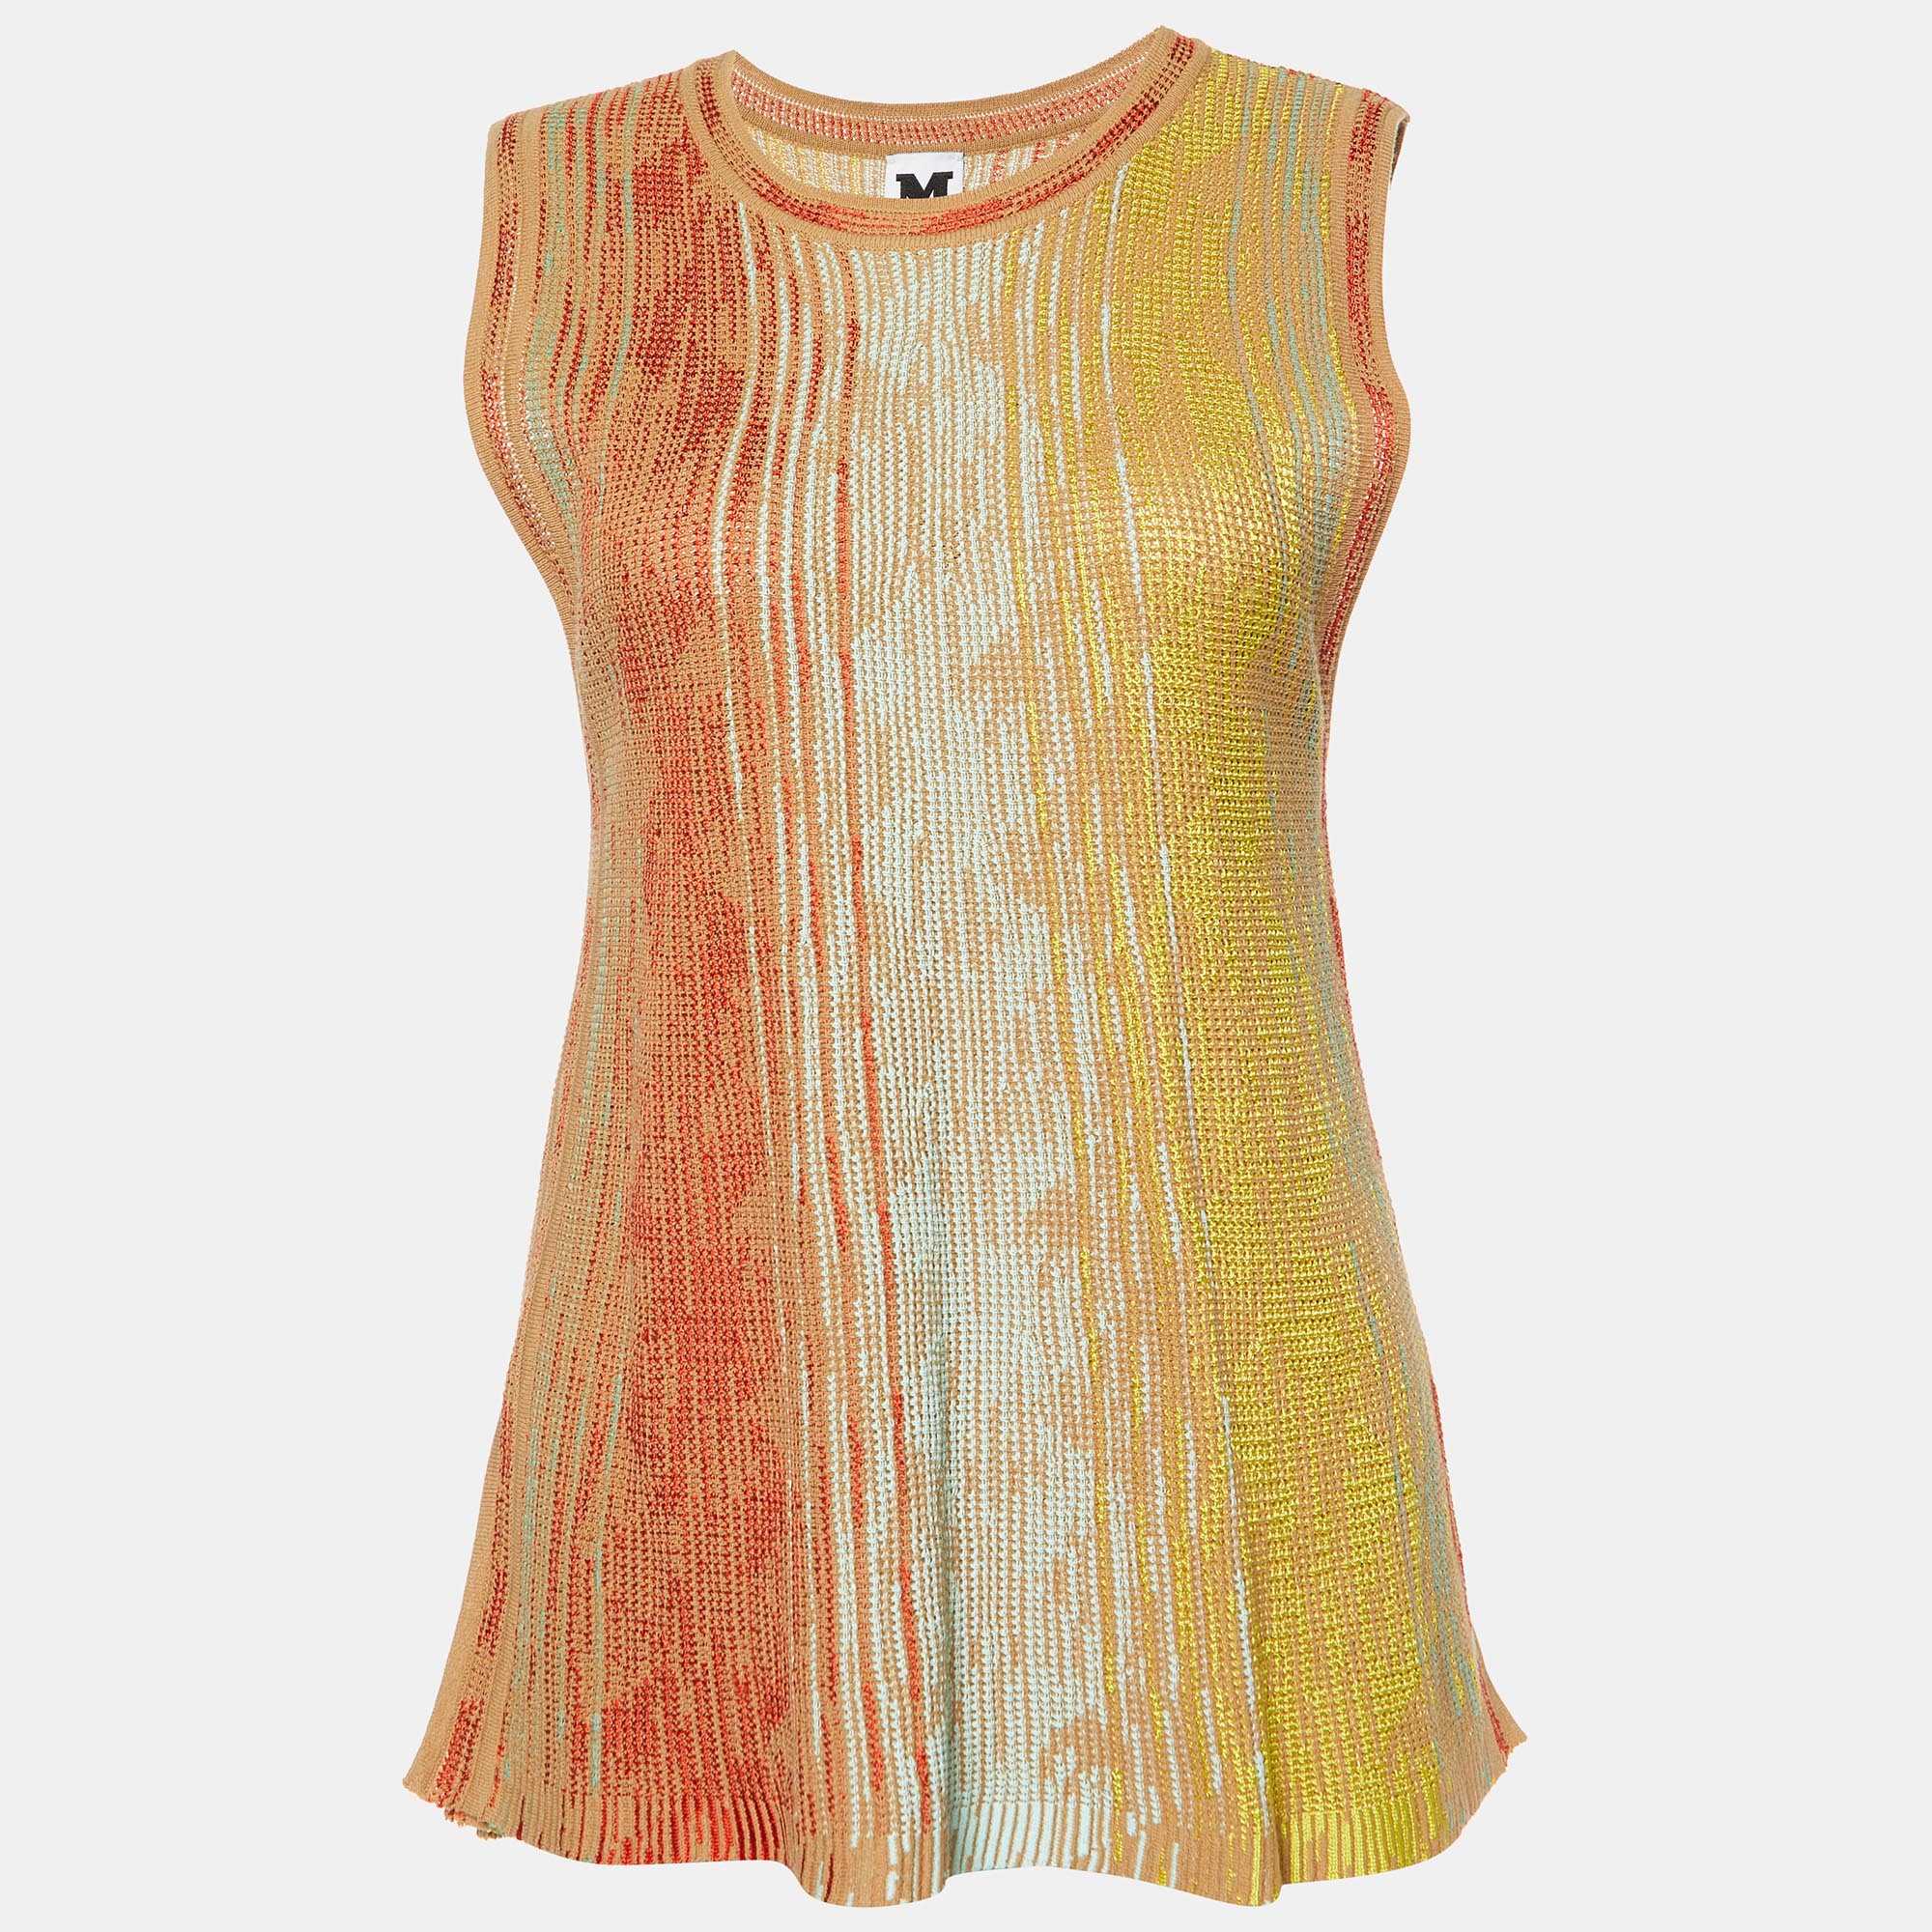 M missoni multicolor textured knit sleeveless top s